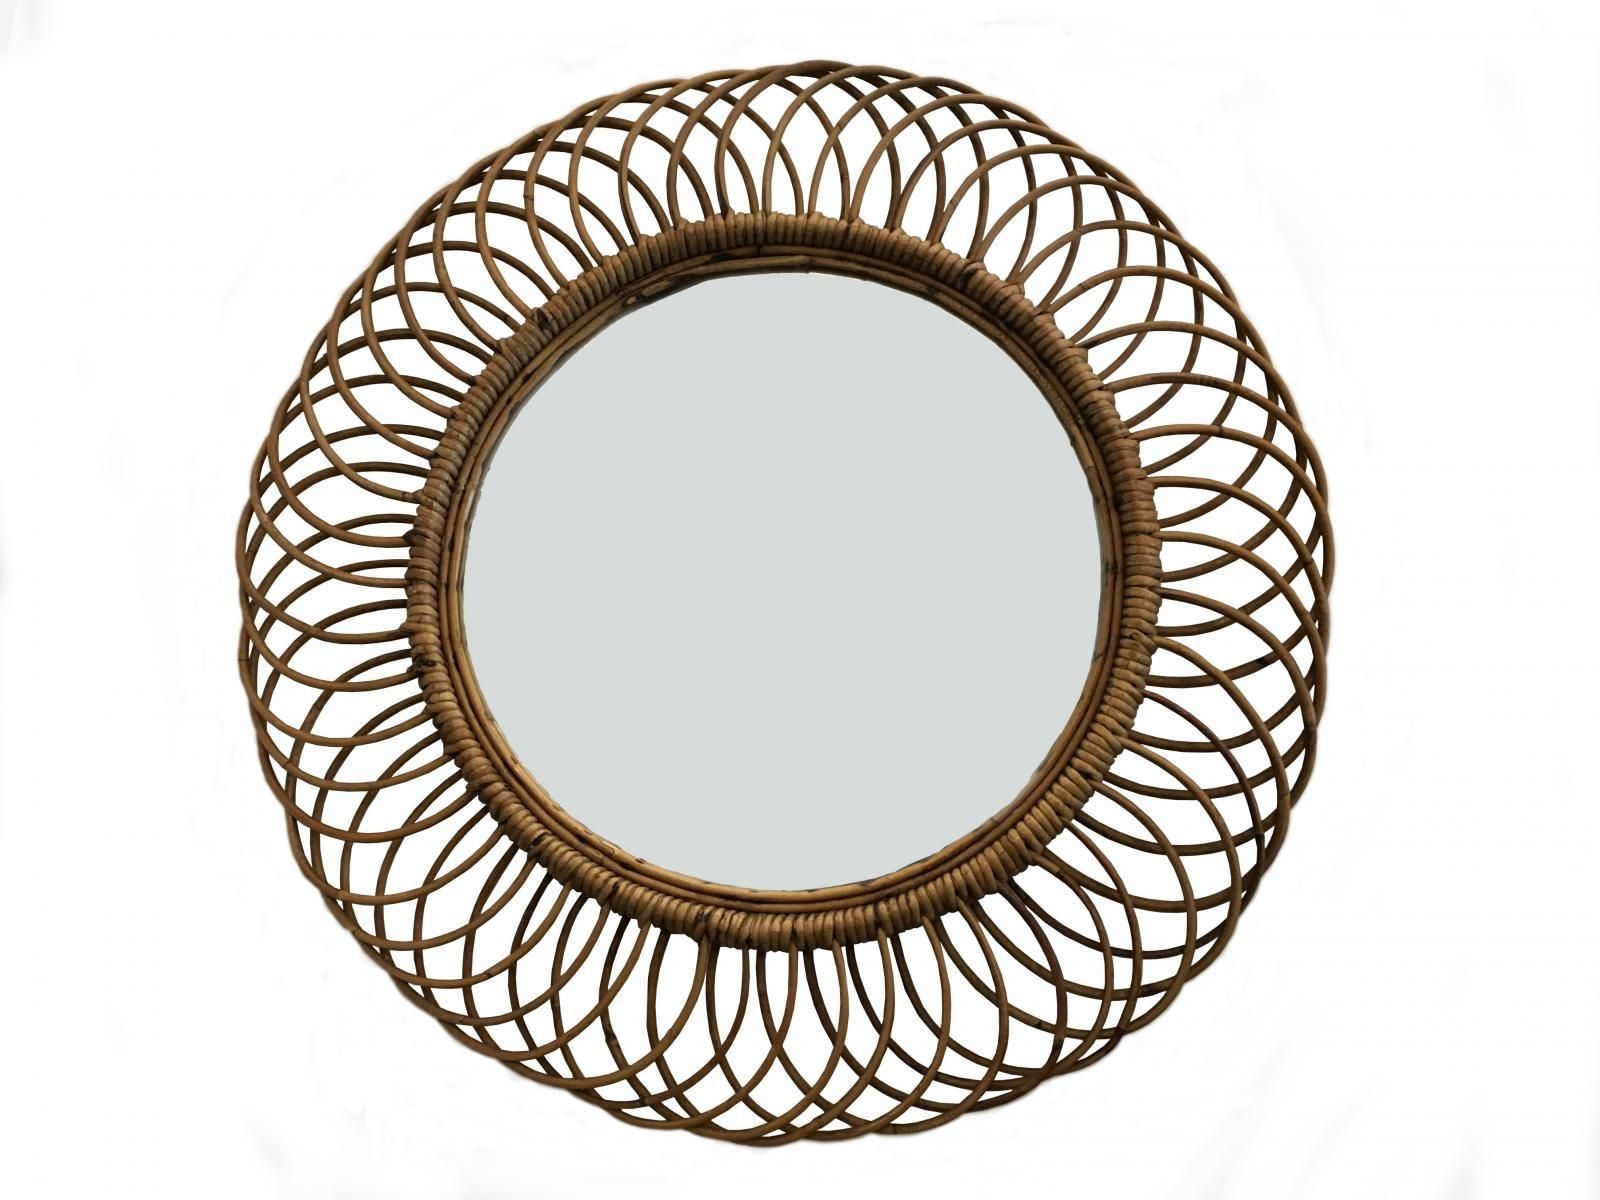 Vintage Wicker Round Wall Mirror, 1960S For Sale At Pamono Within Vintage Wall Mirrors (View 15 of 20)